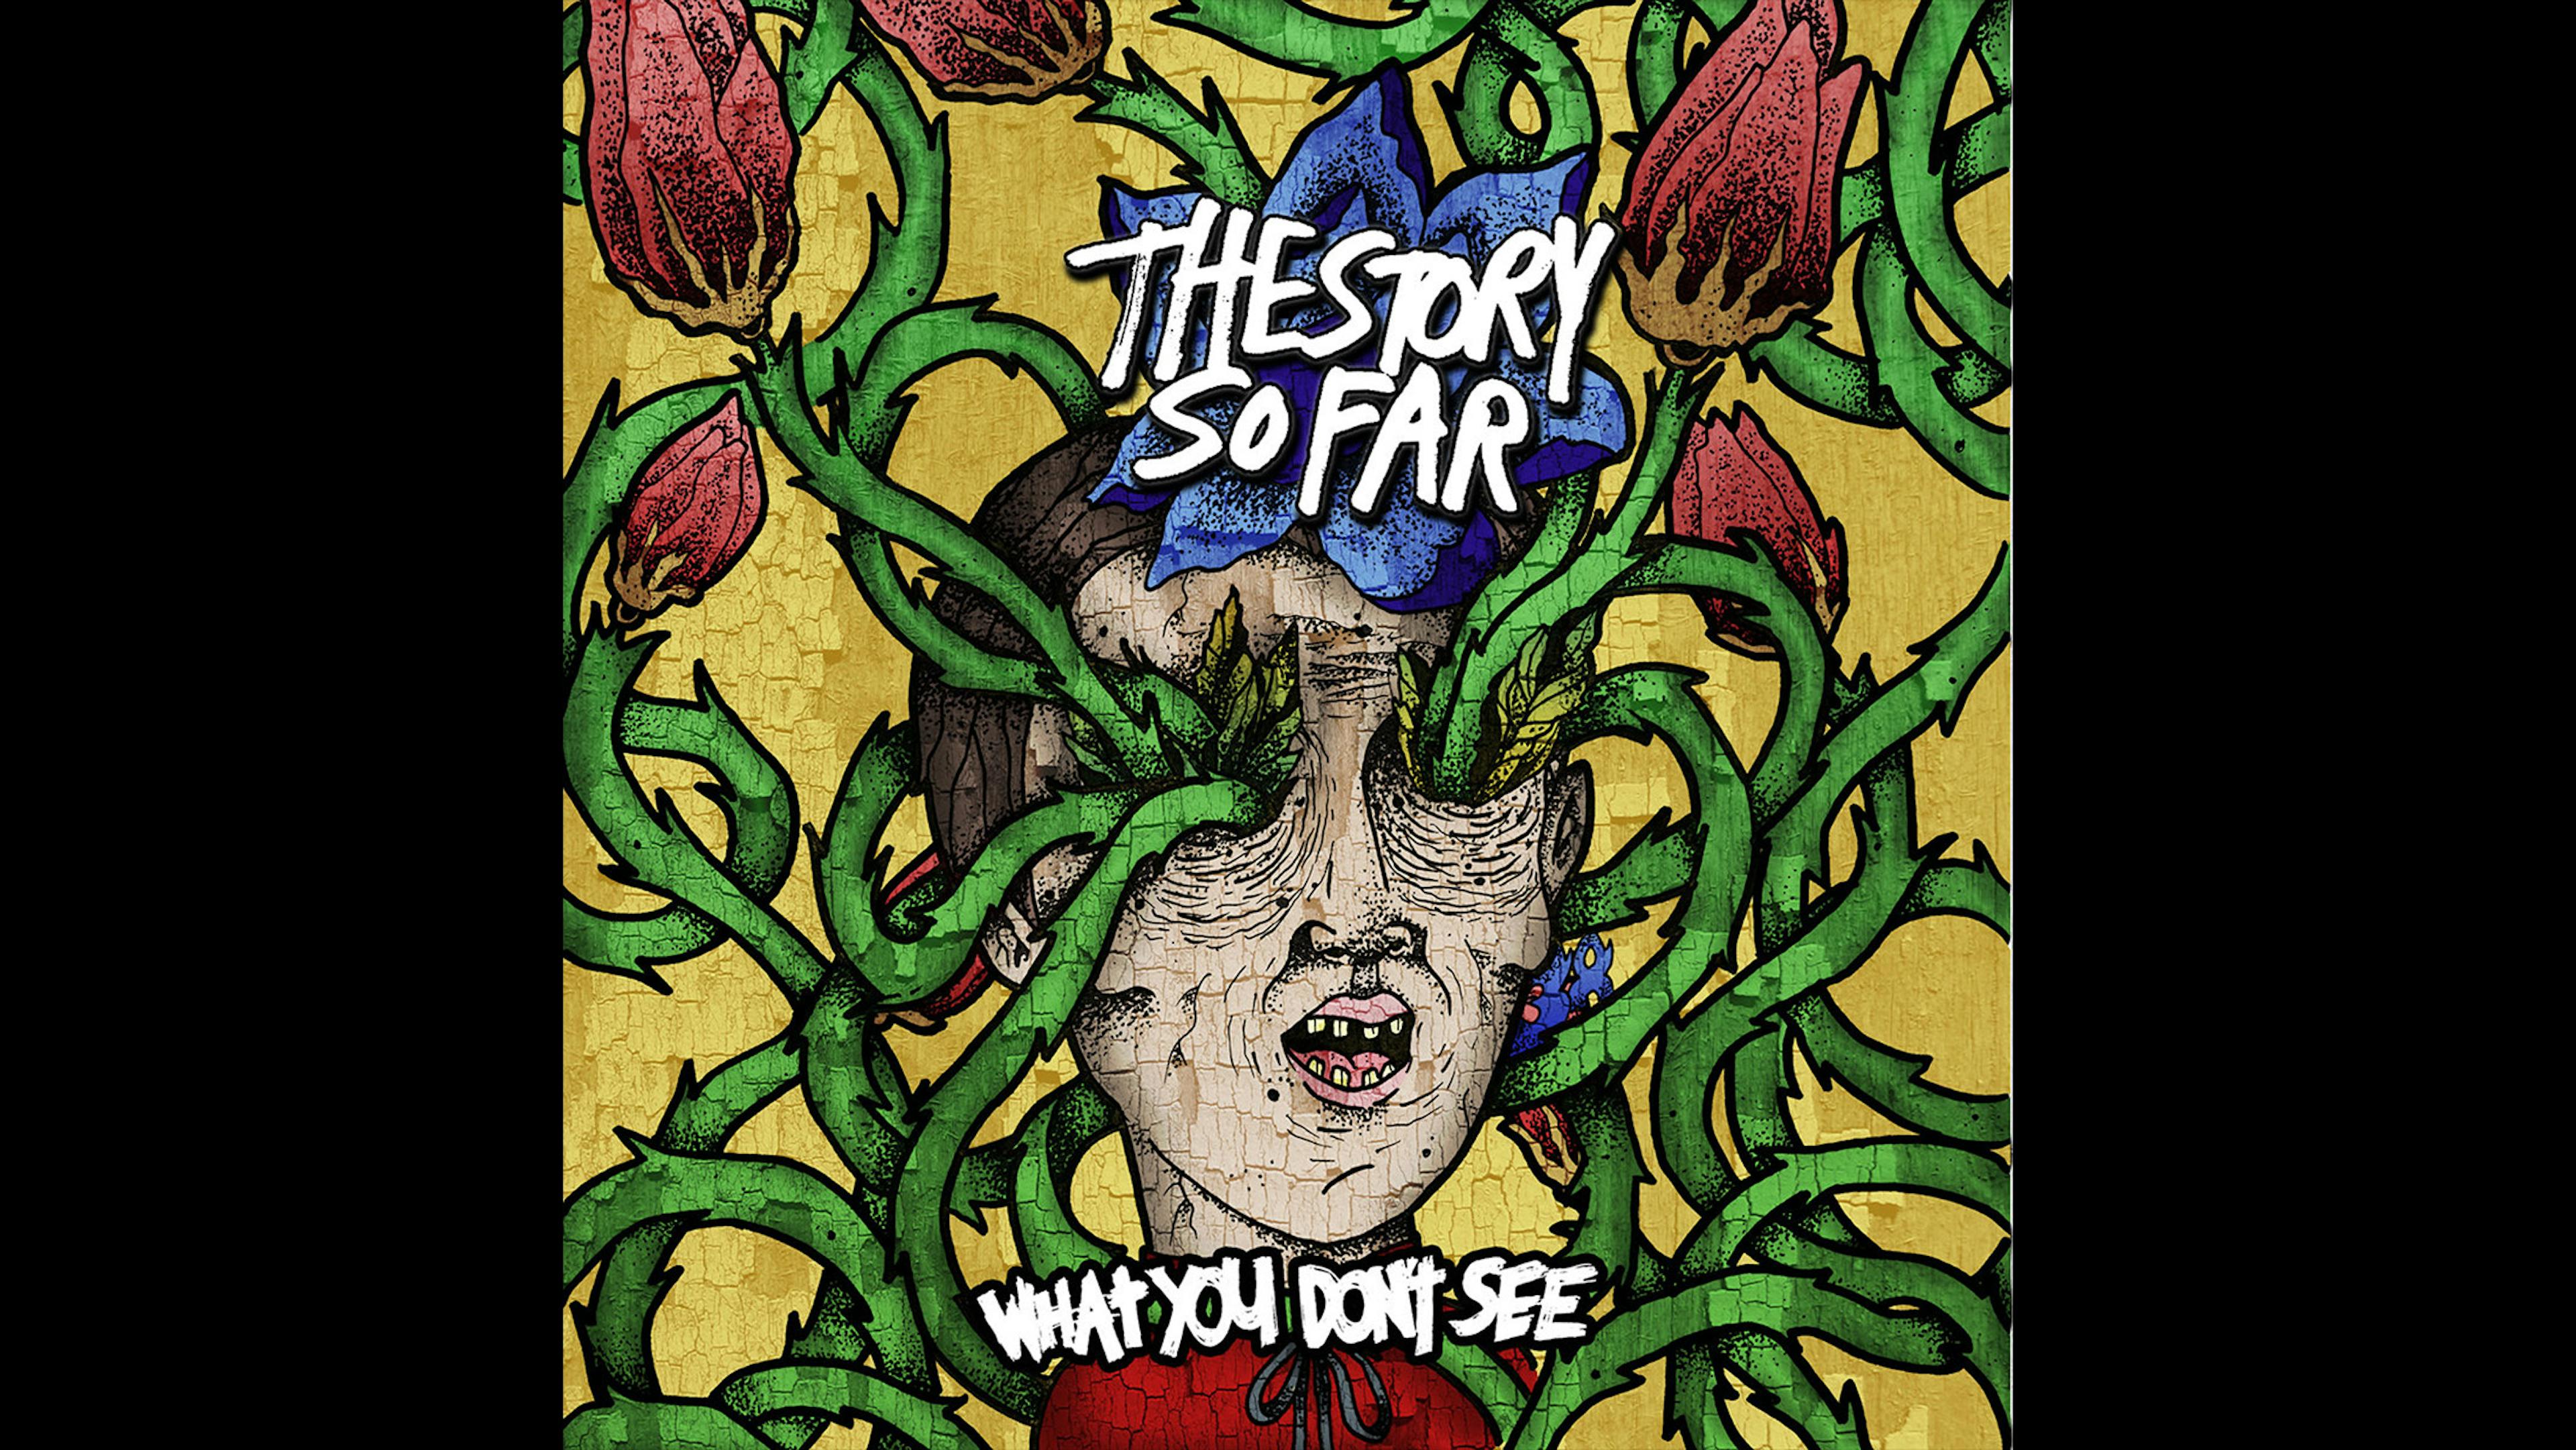 TSSF are, arguably, one of the most influential pop-punk bands of the modern era – their brand of baggy T-shirted stonerisms setting the trend for so much of what has come since they arrived on the scene. What You Don’t See is their finest hour to date, full of bounce, vim and vigour, and no small amount of aggression.